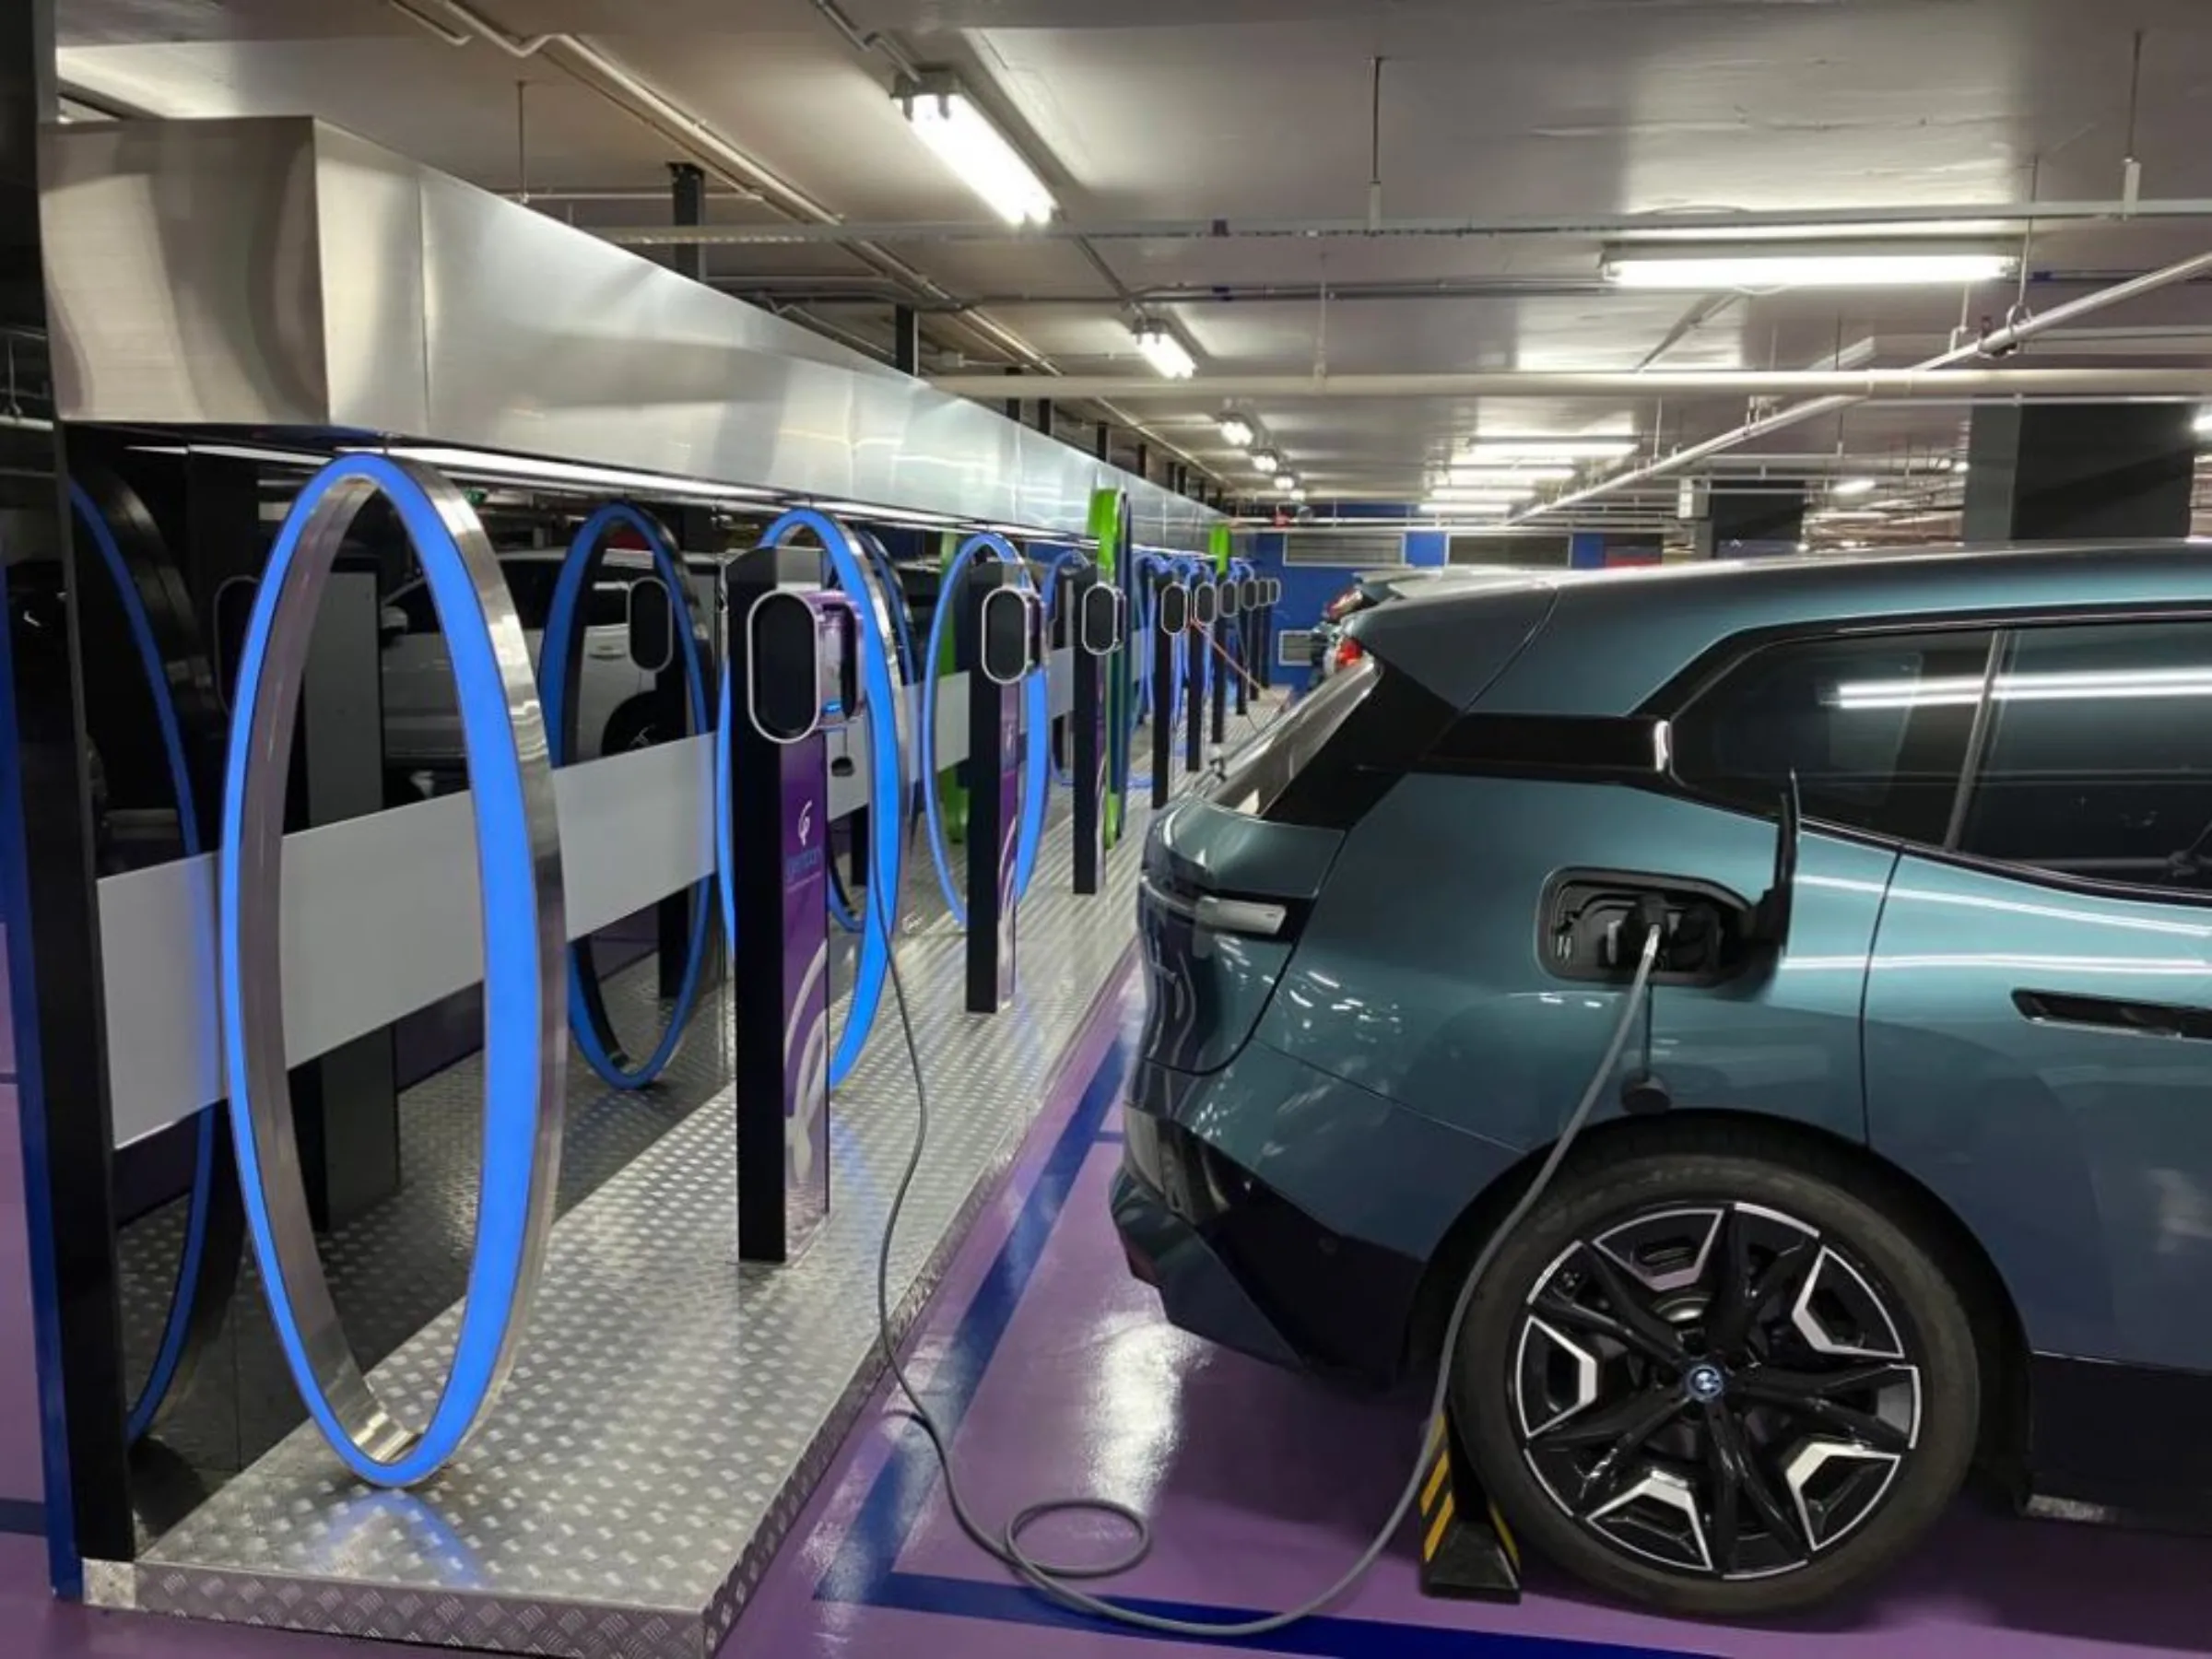 Electric vehicle charging points in the car park under the iconic Petronas Twin Towers in Kuala Lumpur, Malaysia. February 15, 2023